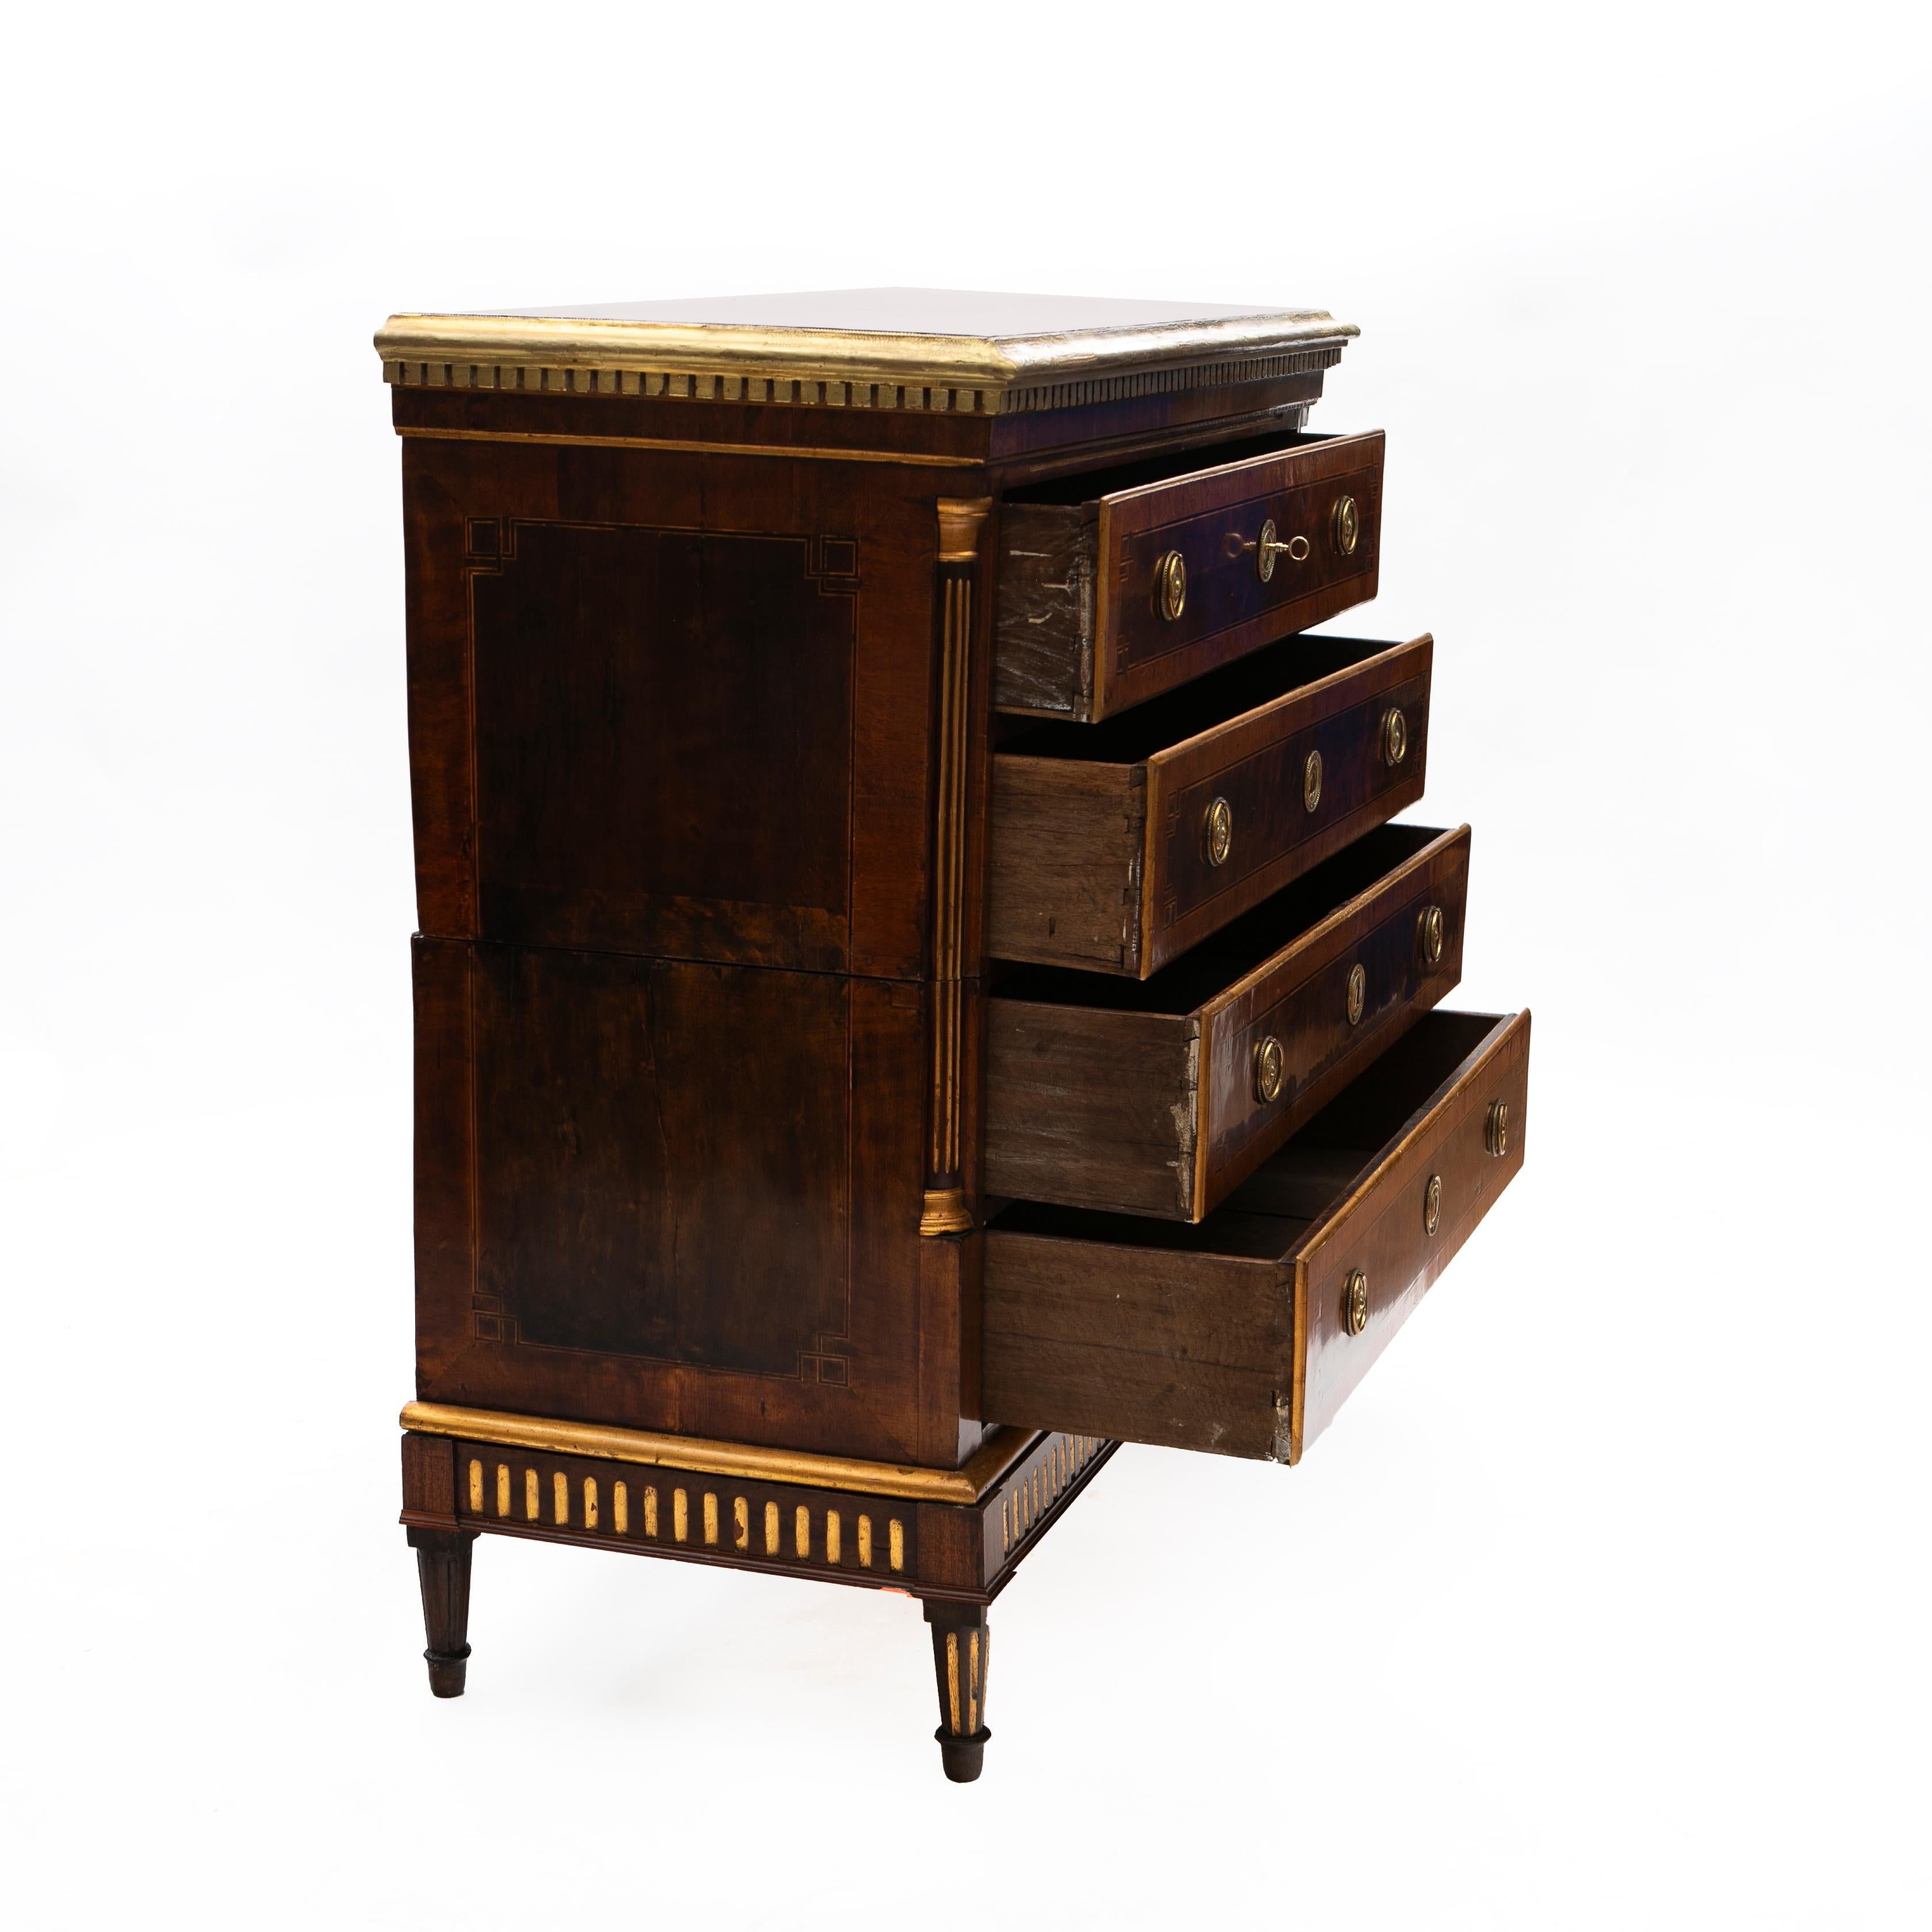 Large and decorative Louis XVI chest of drawers / commode. 
The four drawer commode has a stunning walnut veneer grain with geometric ribbons inlays in satinwood, which frames the darker veneer fields on the middle of each drawer.
The sides are